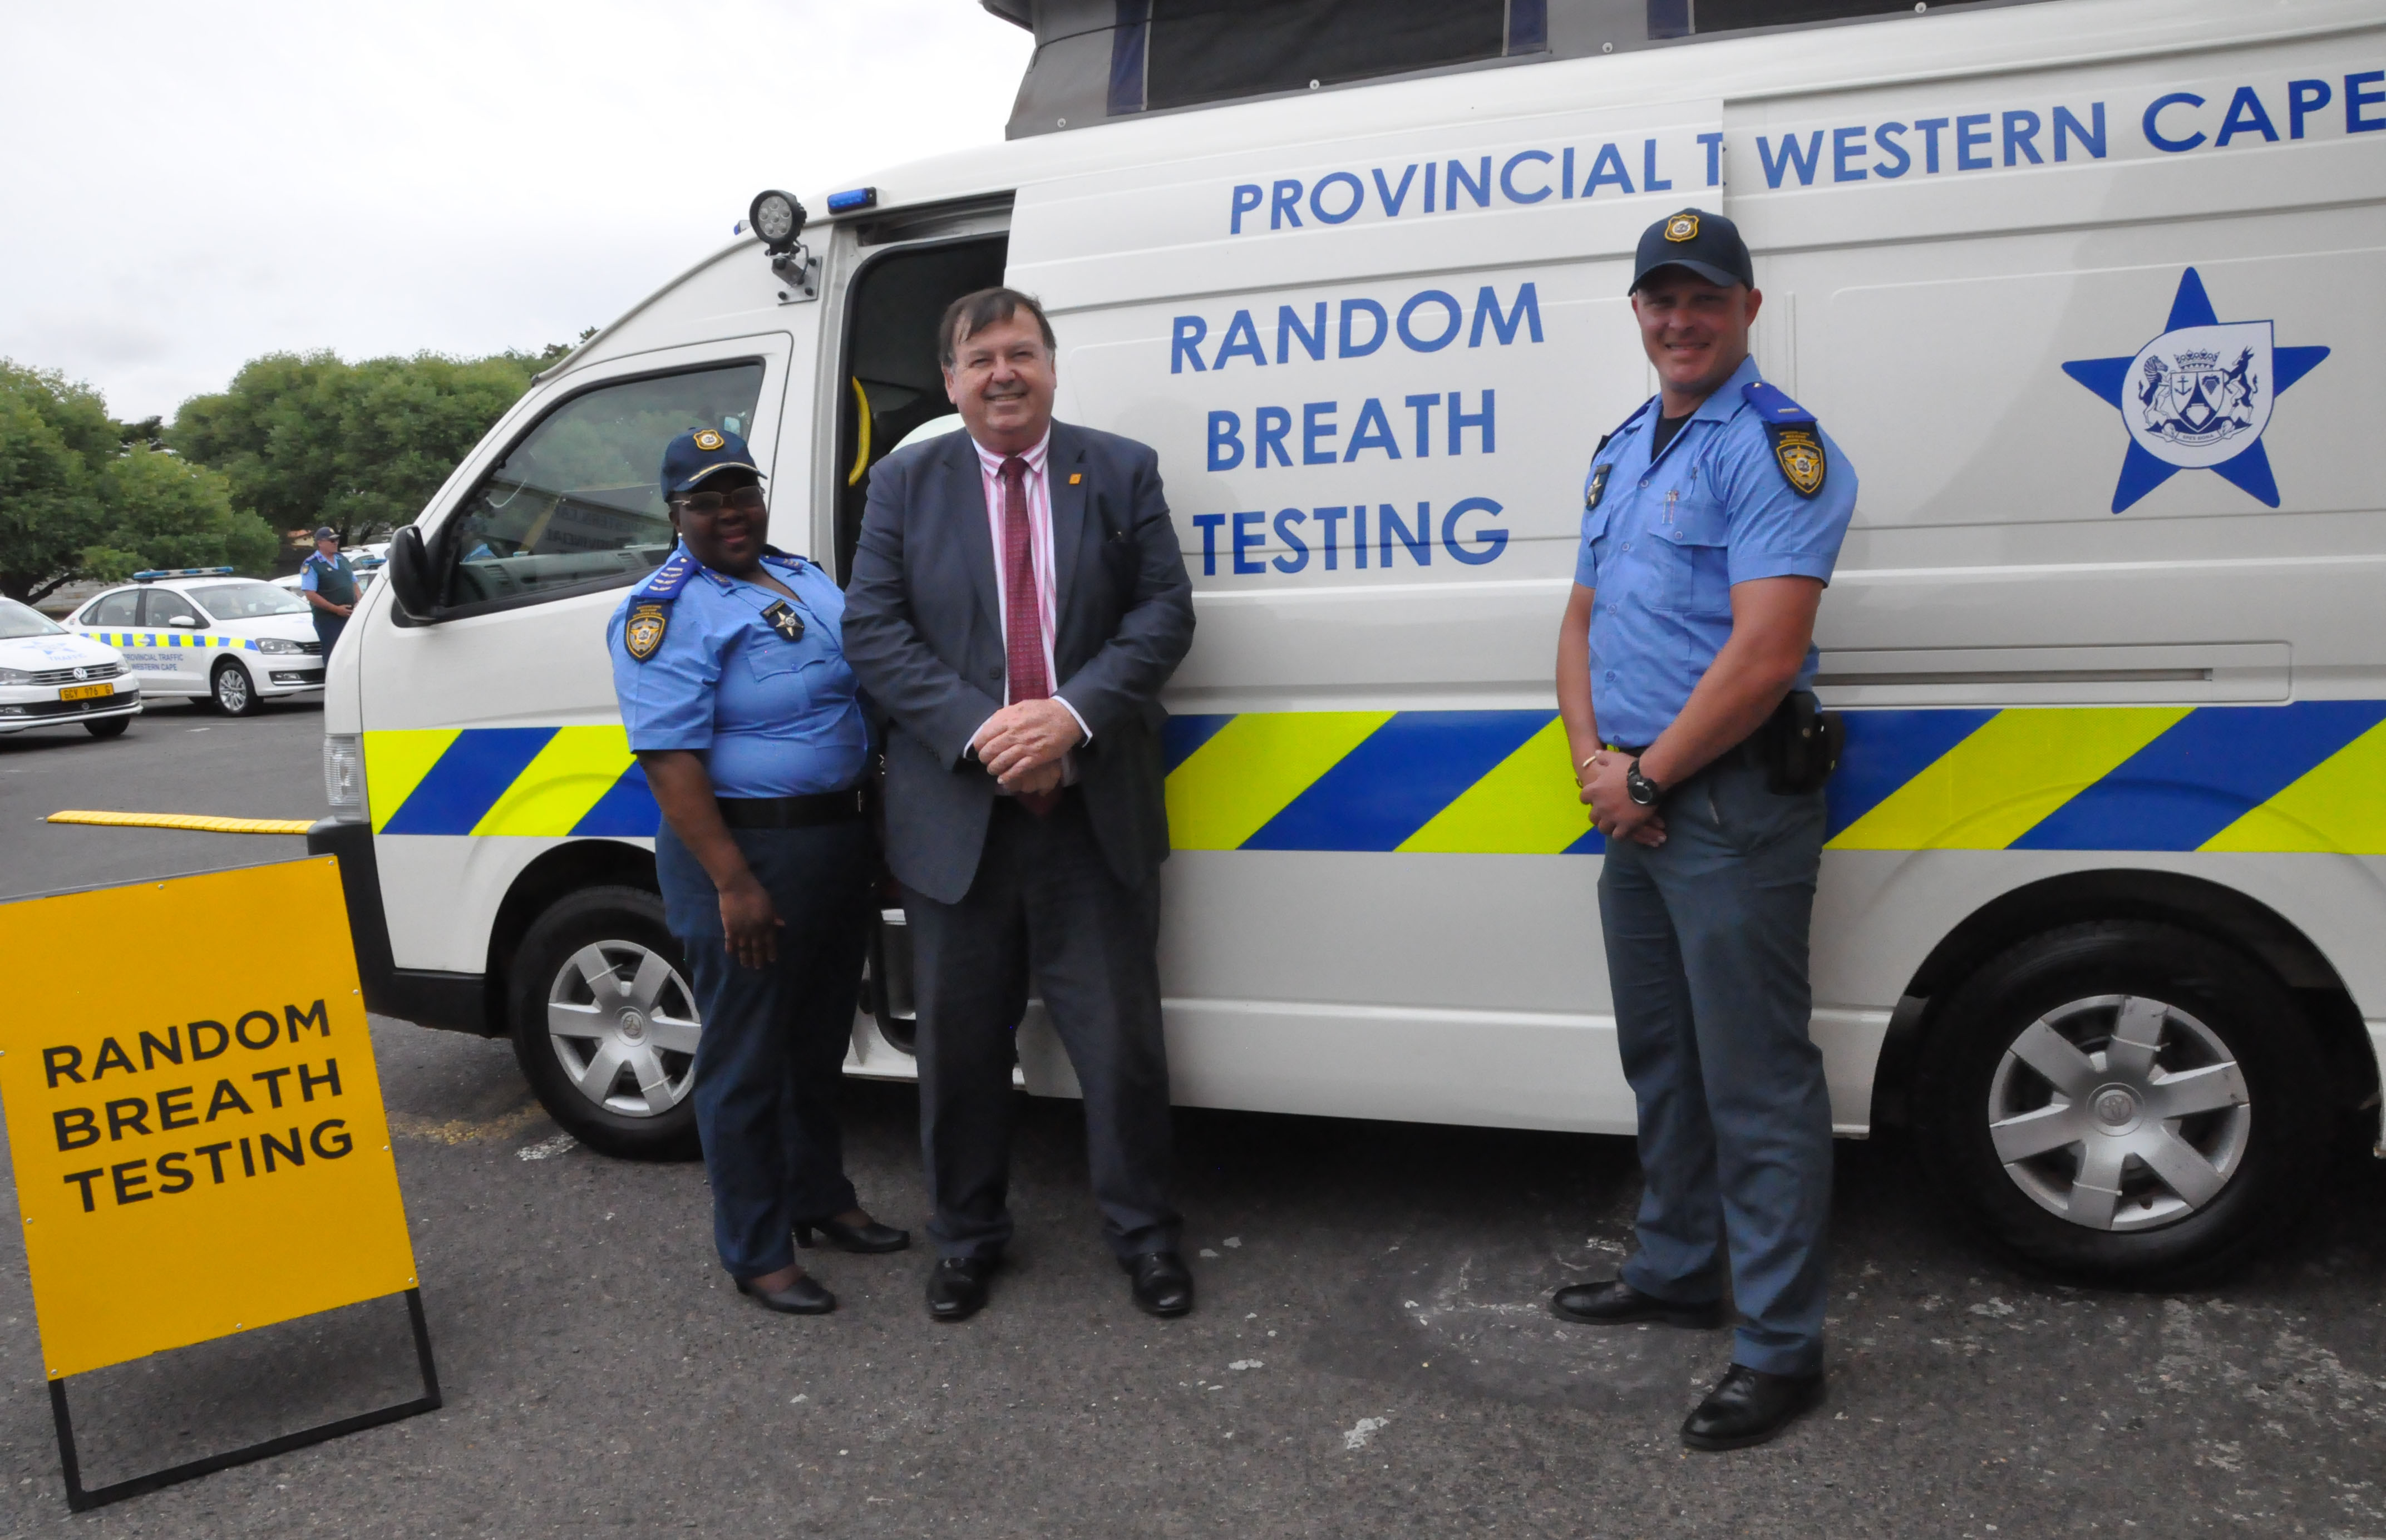 Minister Grant with provincial traffic officers and one of the new Mobile Alcohol Evidentiary Units at the launch.